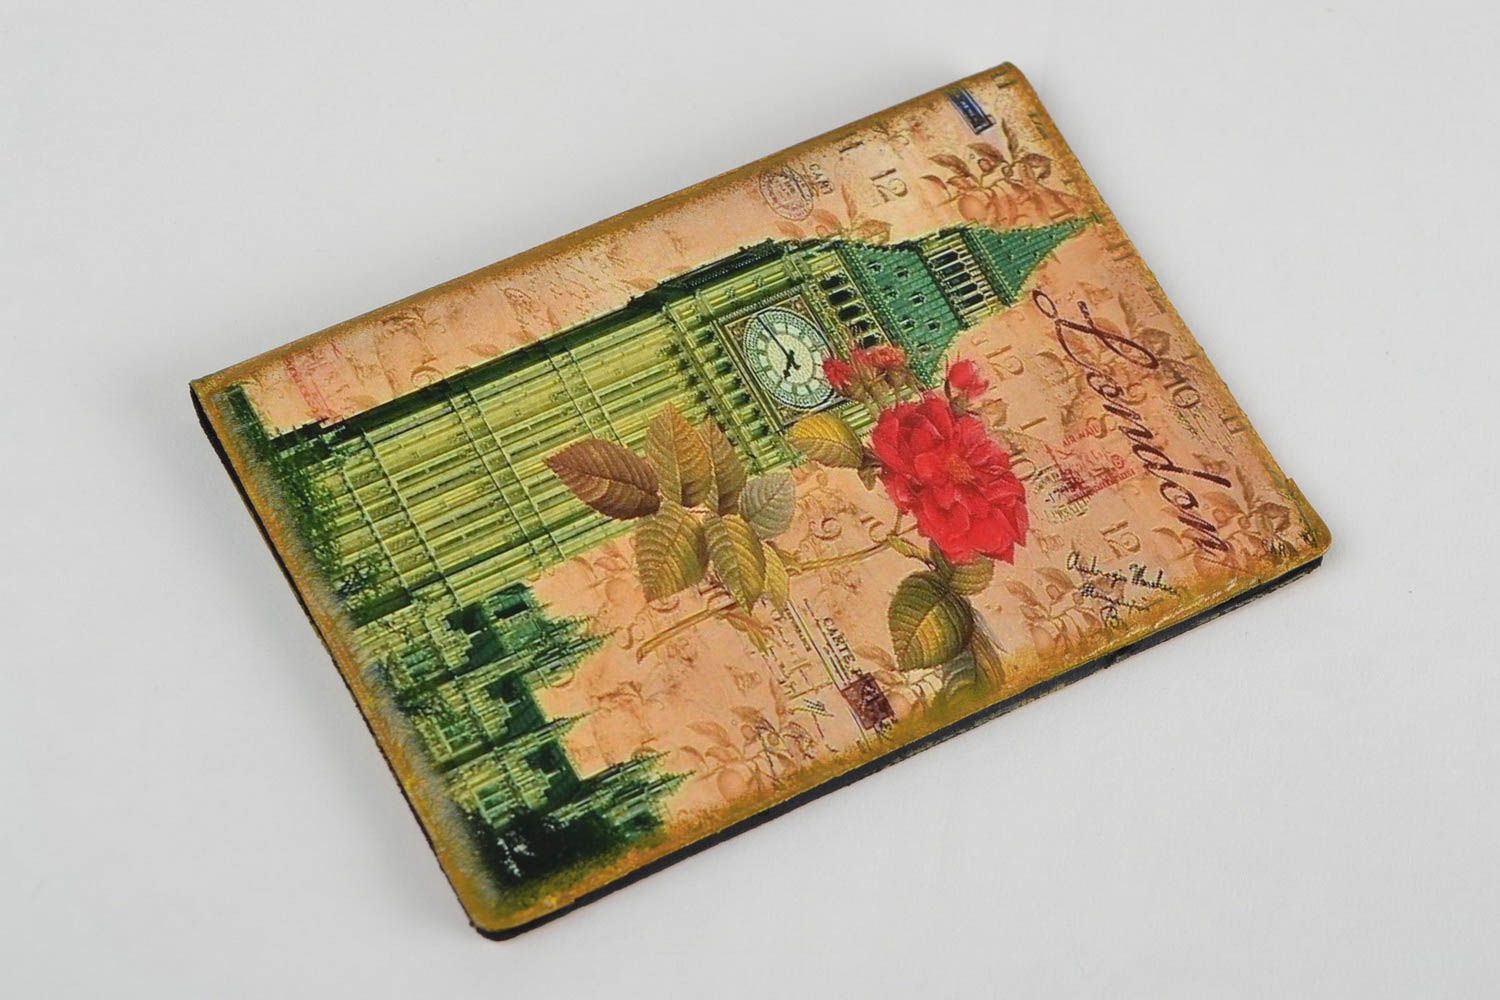 Handmade faux leather passport cover with decoupage image of Big Ben and rose photo 4